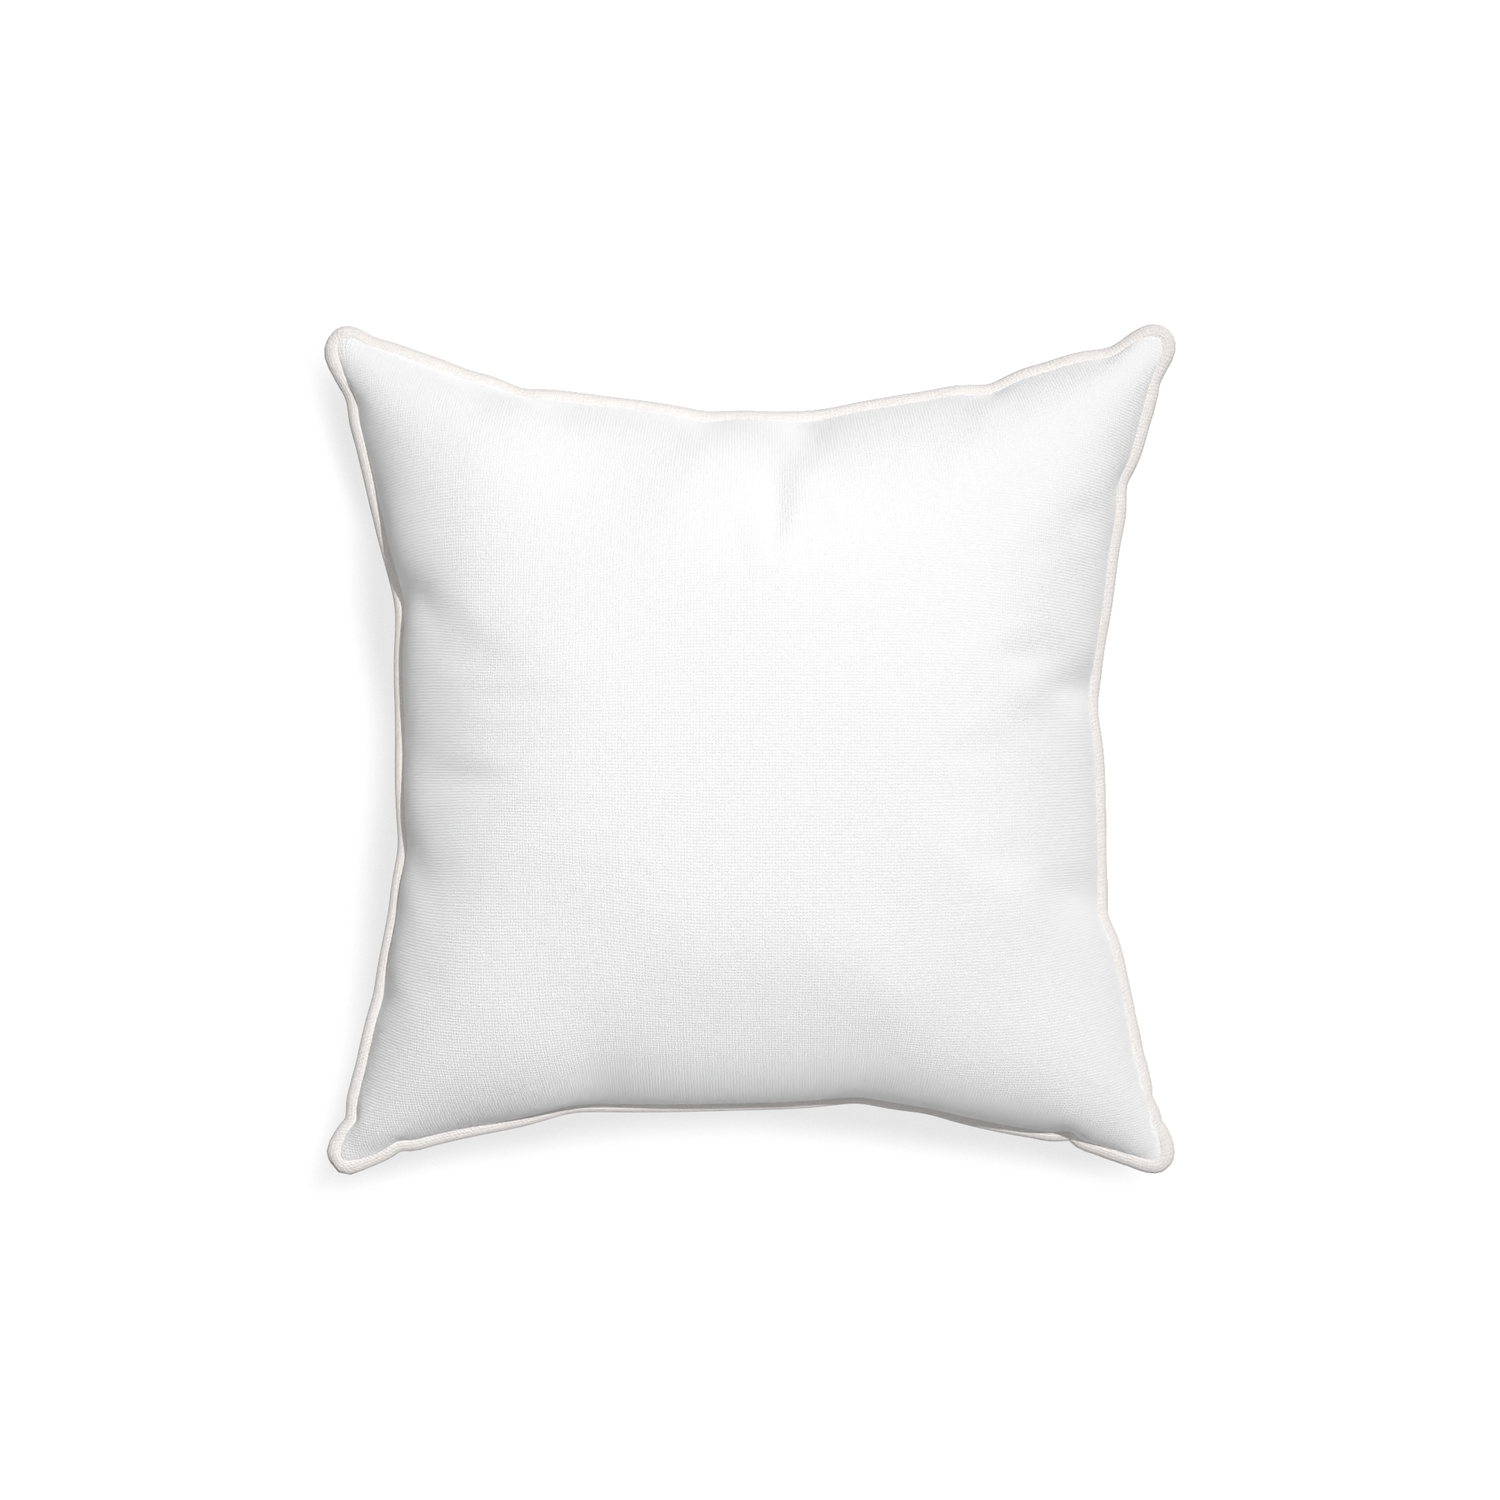 18-square snow custom pillow with snow piping on white background